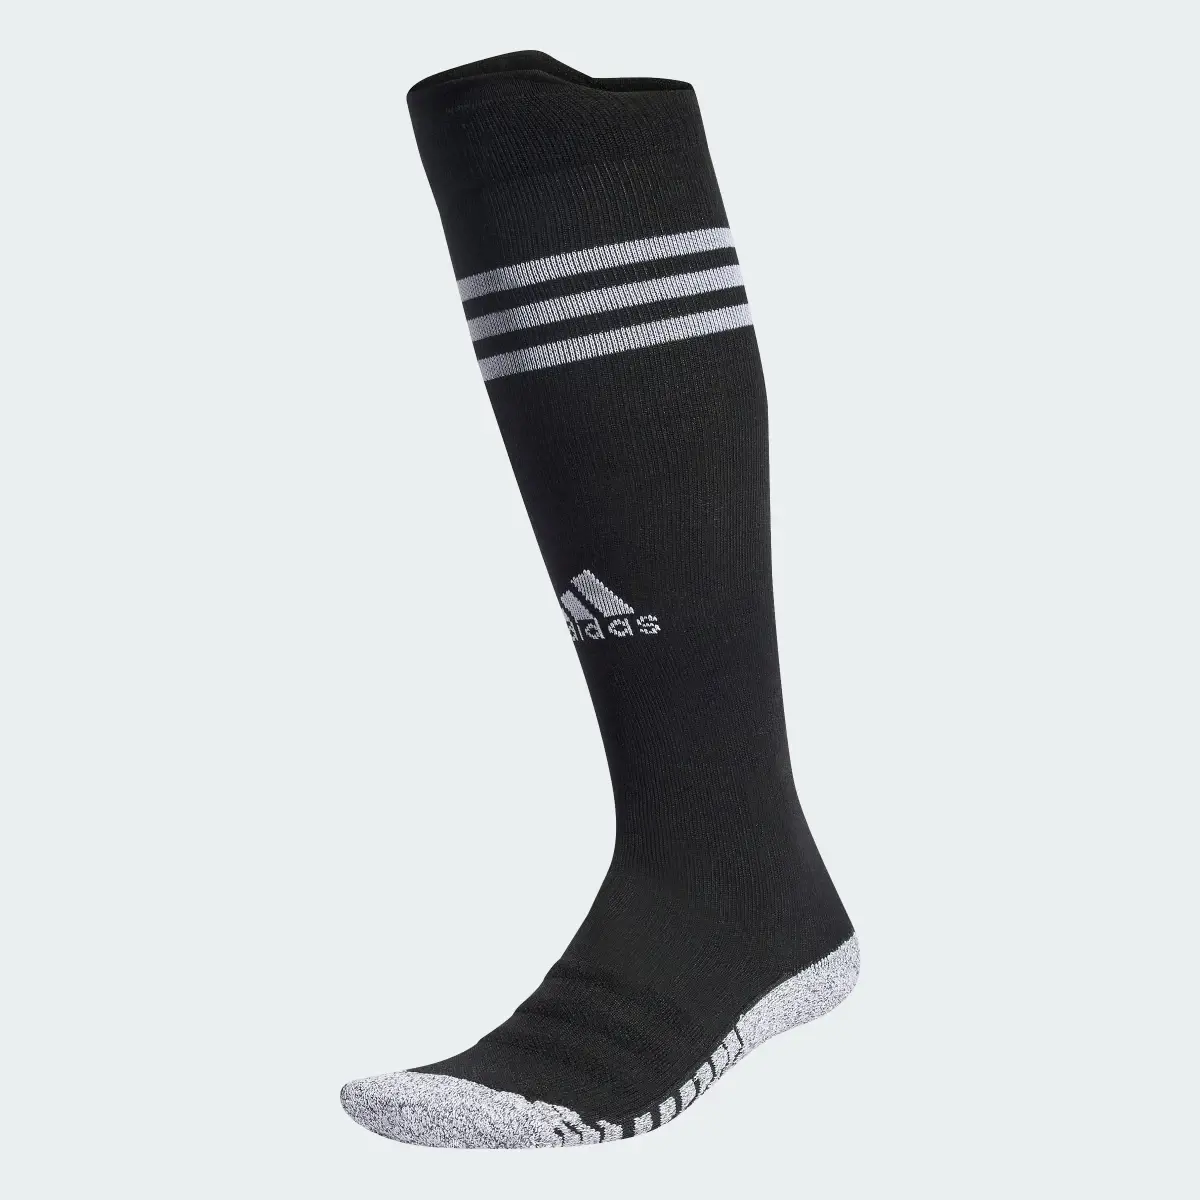 Adidas Chaussettes montantes All Blacks Rugby. 1